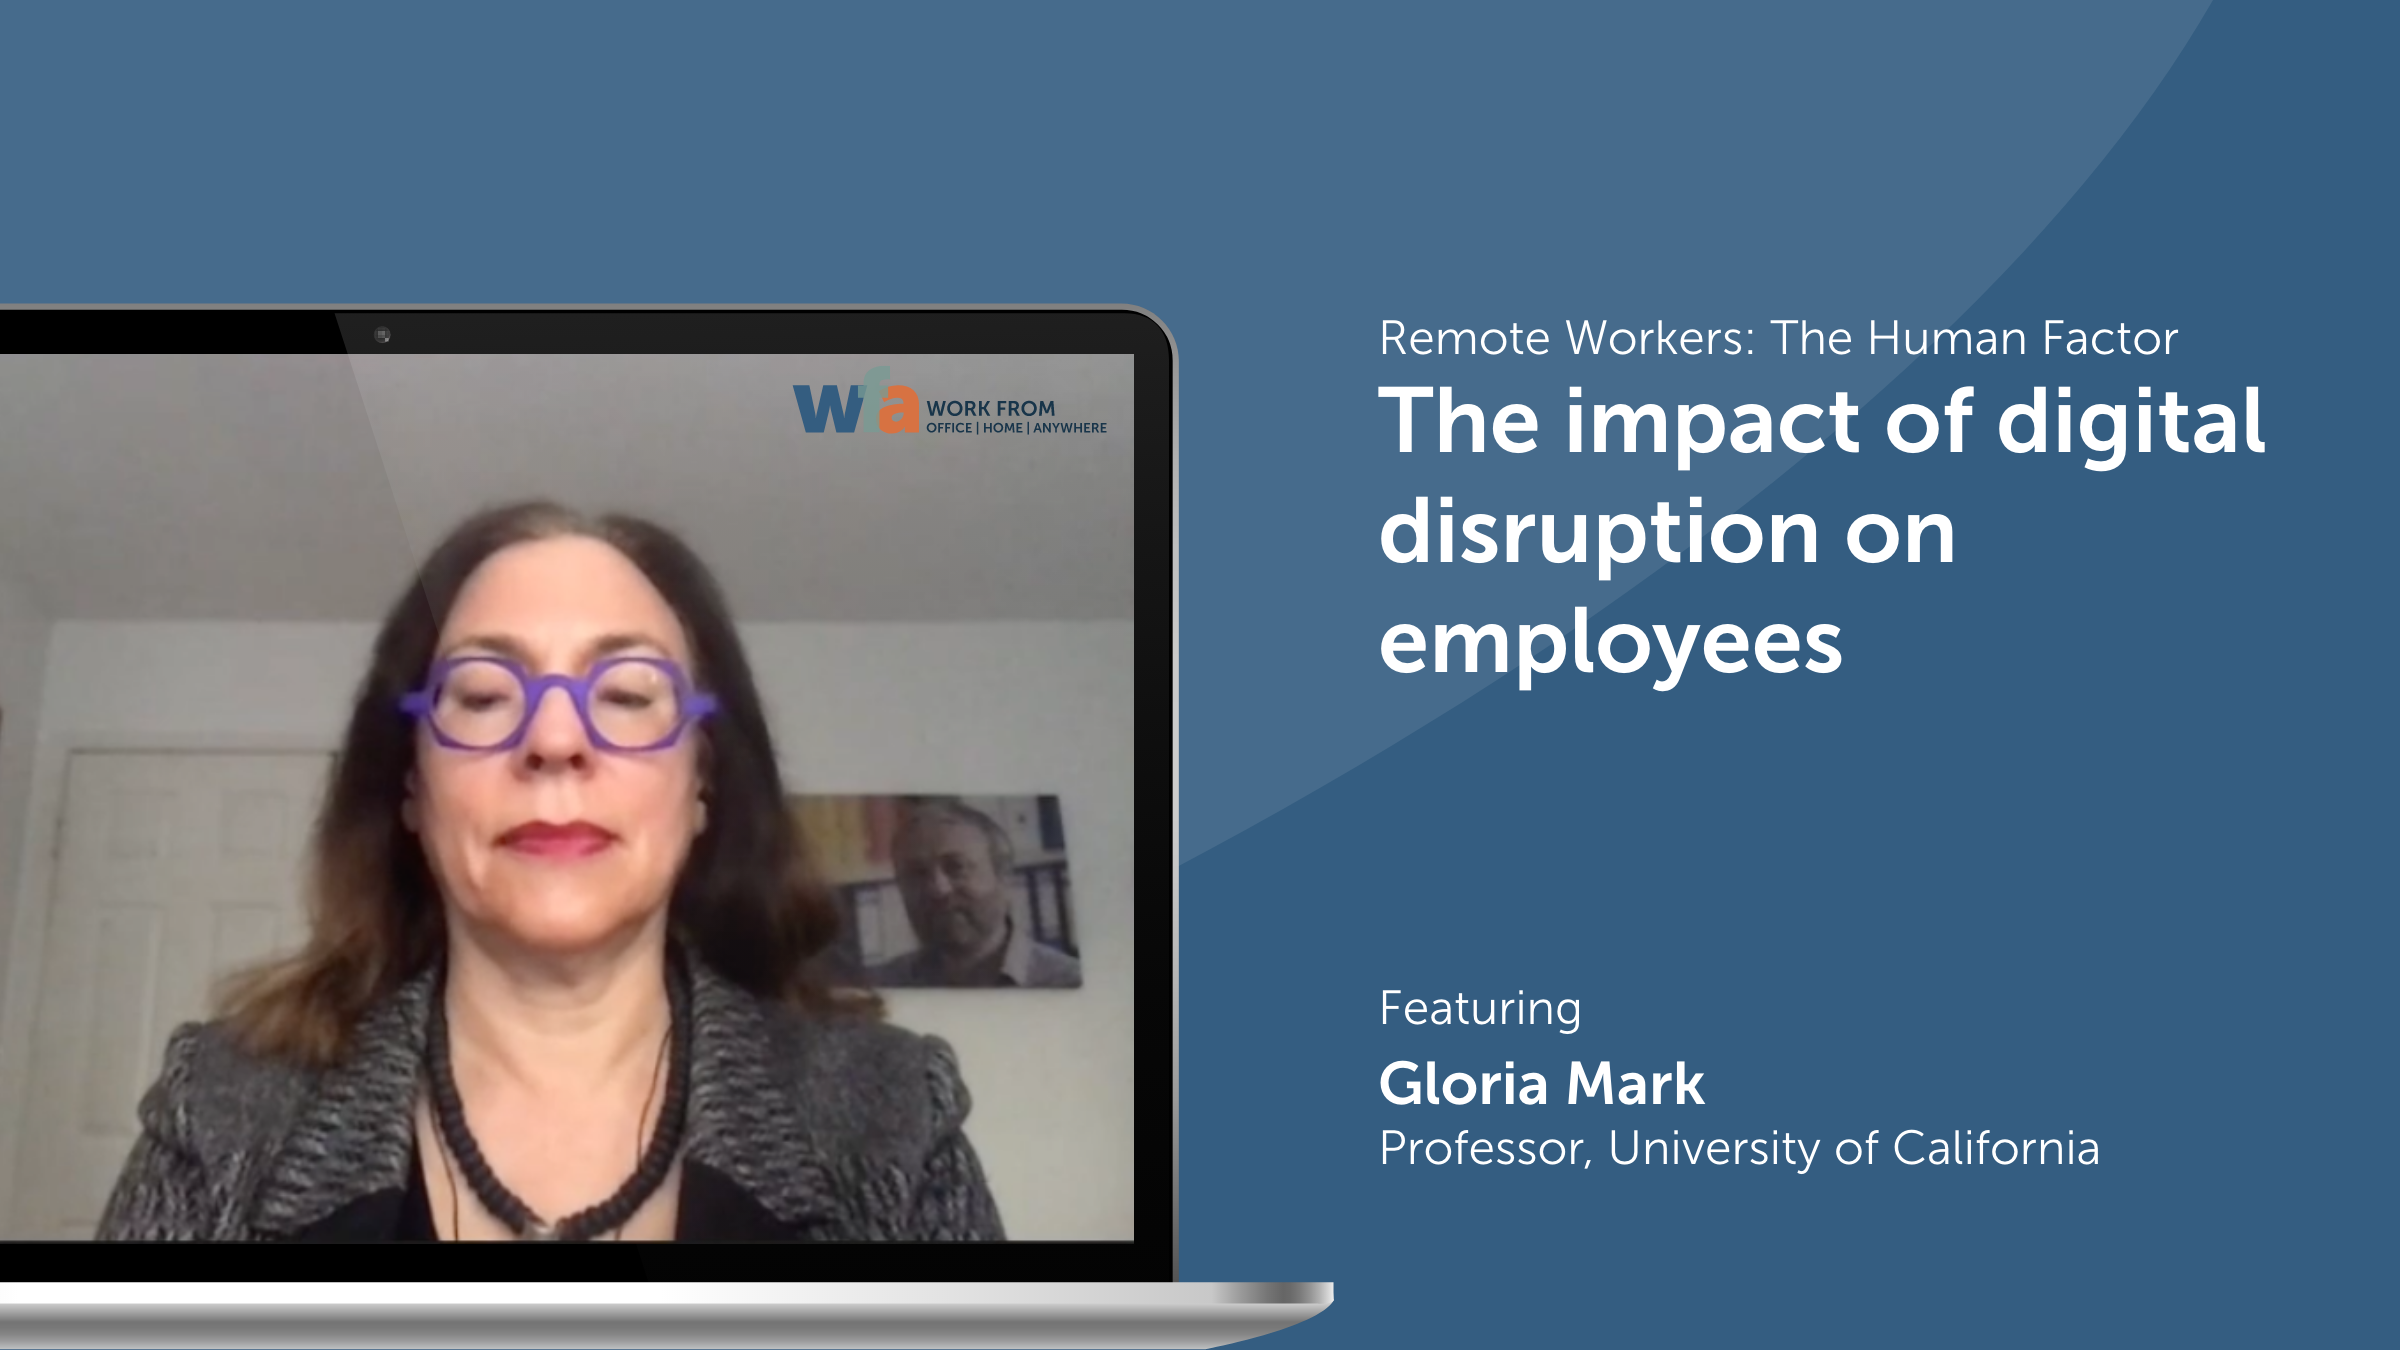 The impact of digital disruption on employees